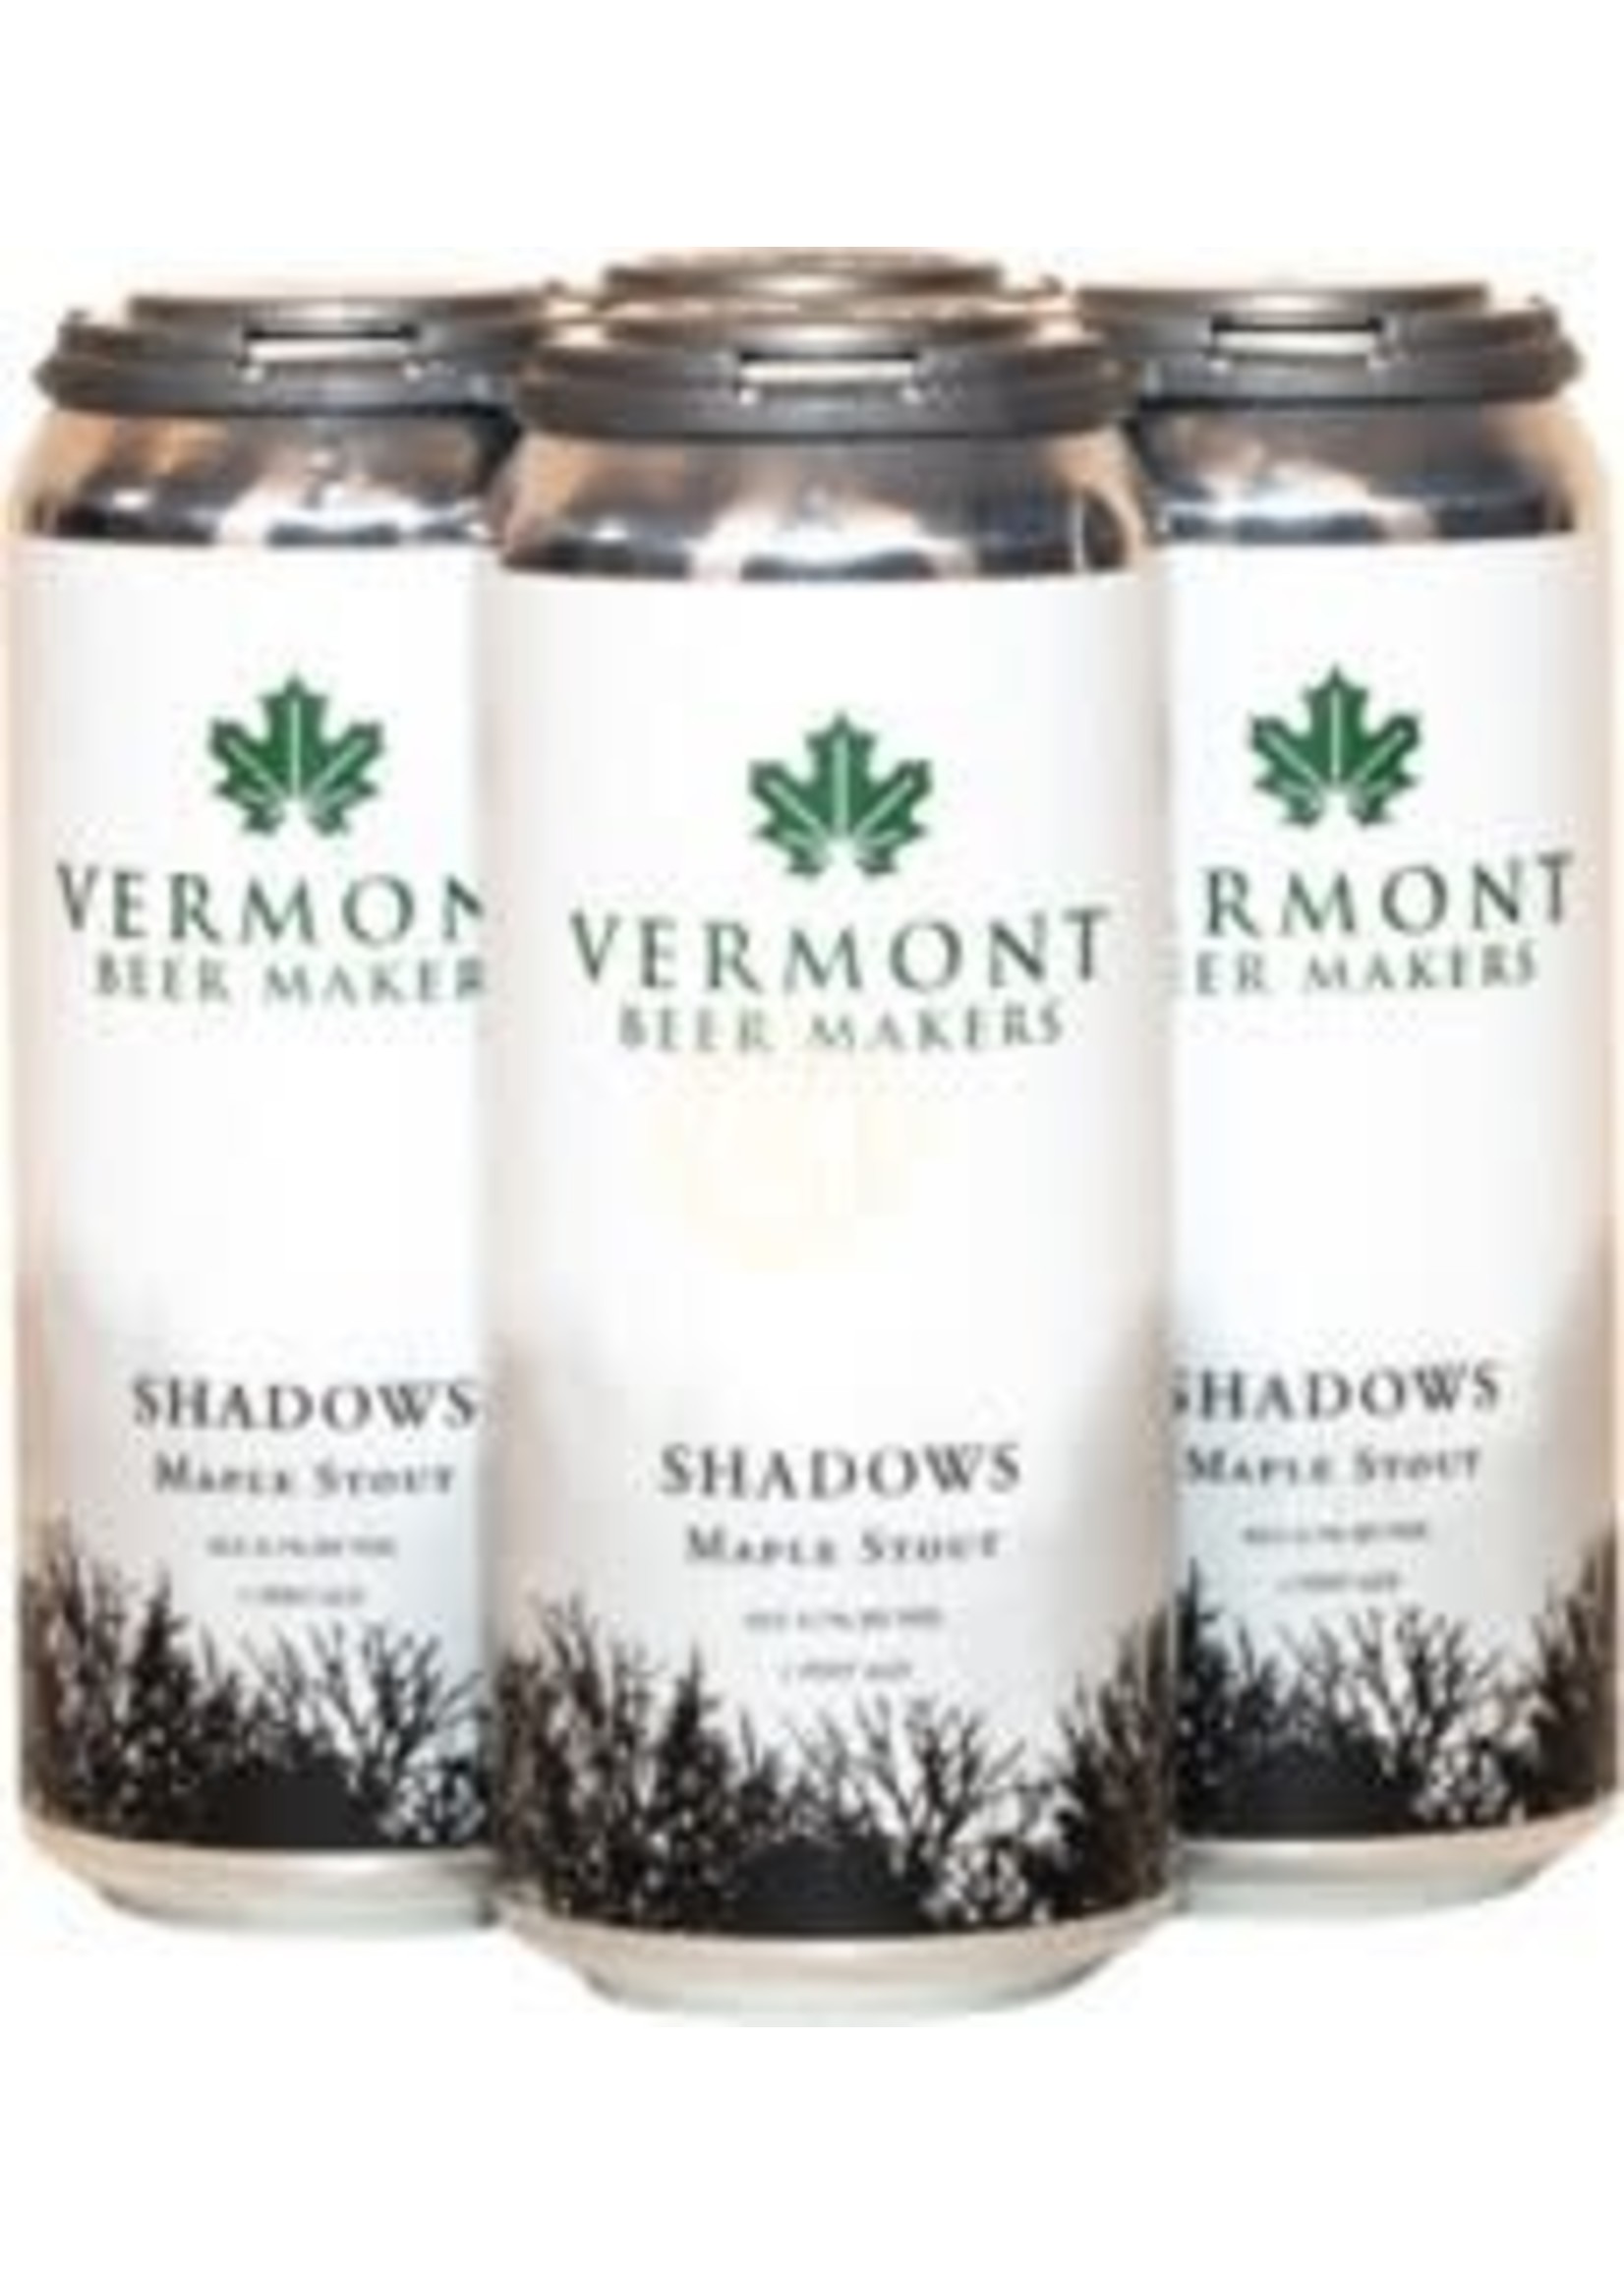 Vermont Beer Makers Vermont Beer Makers Shadows Maple Stout 4pk